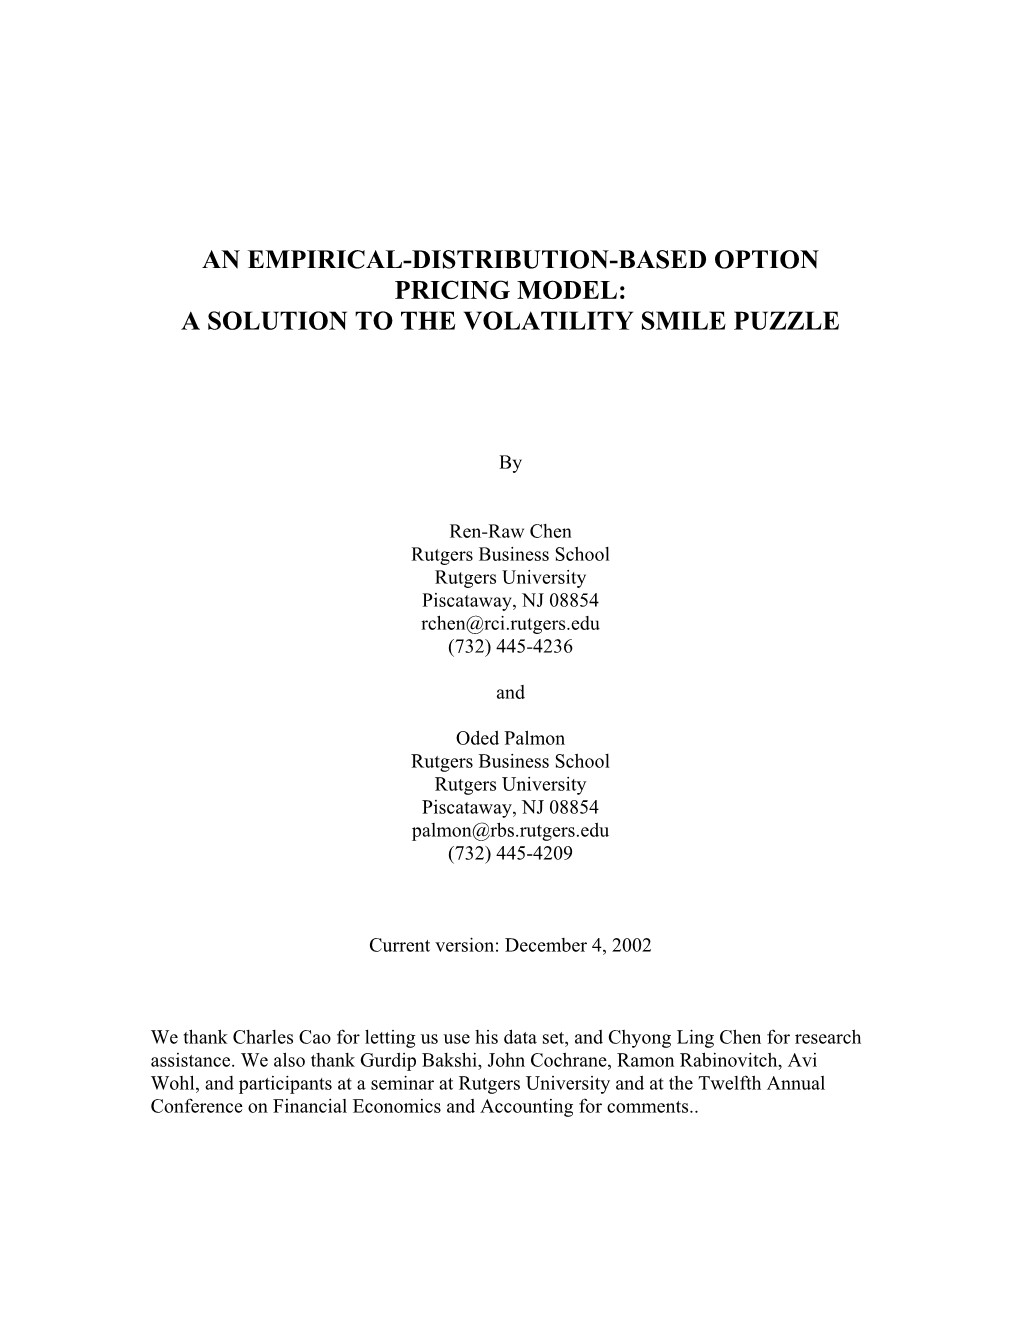 An Empirical-Distribution-Based Option Pricing Model: a Solution to the Volatility Smile Puzzle